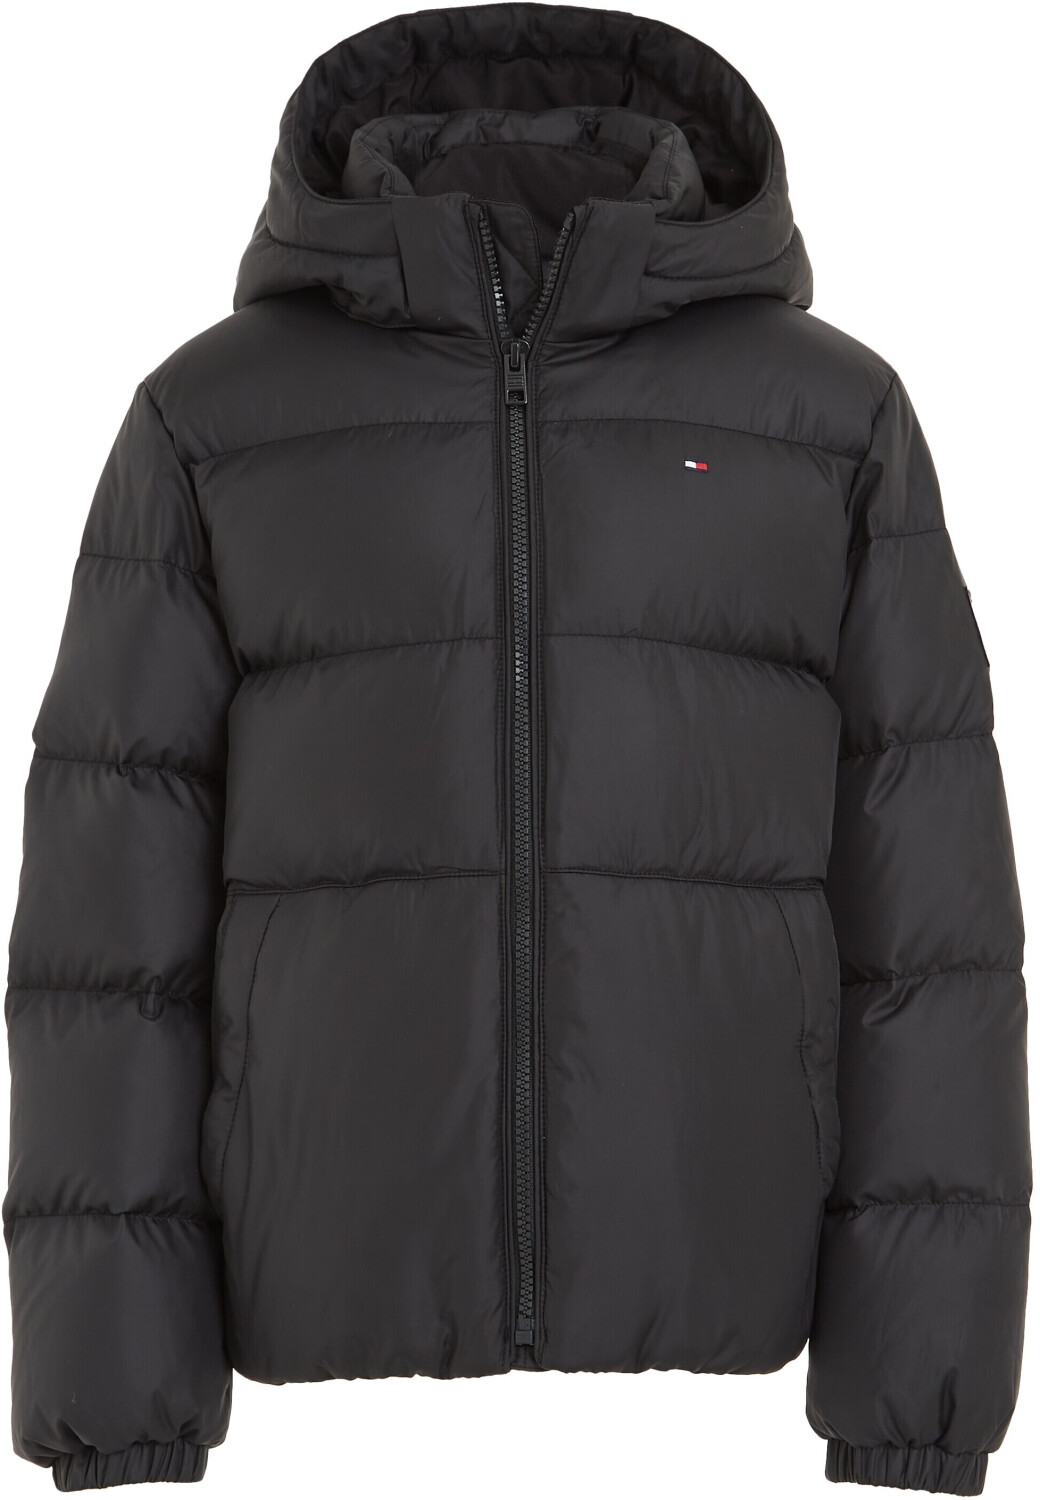 Buy Tommy Hilfiger Quilted jacket (KB0KB08341) black from £75.00 (Today ...